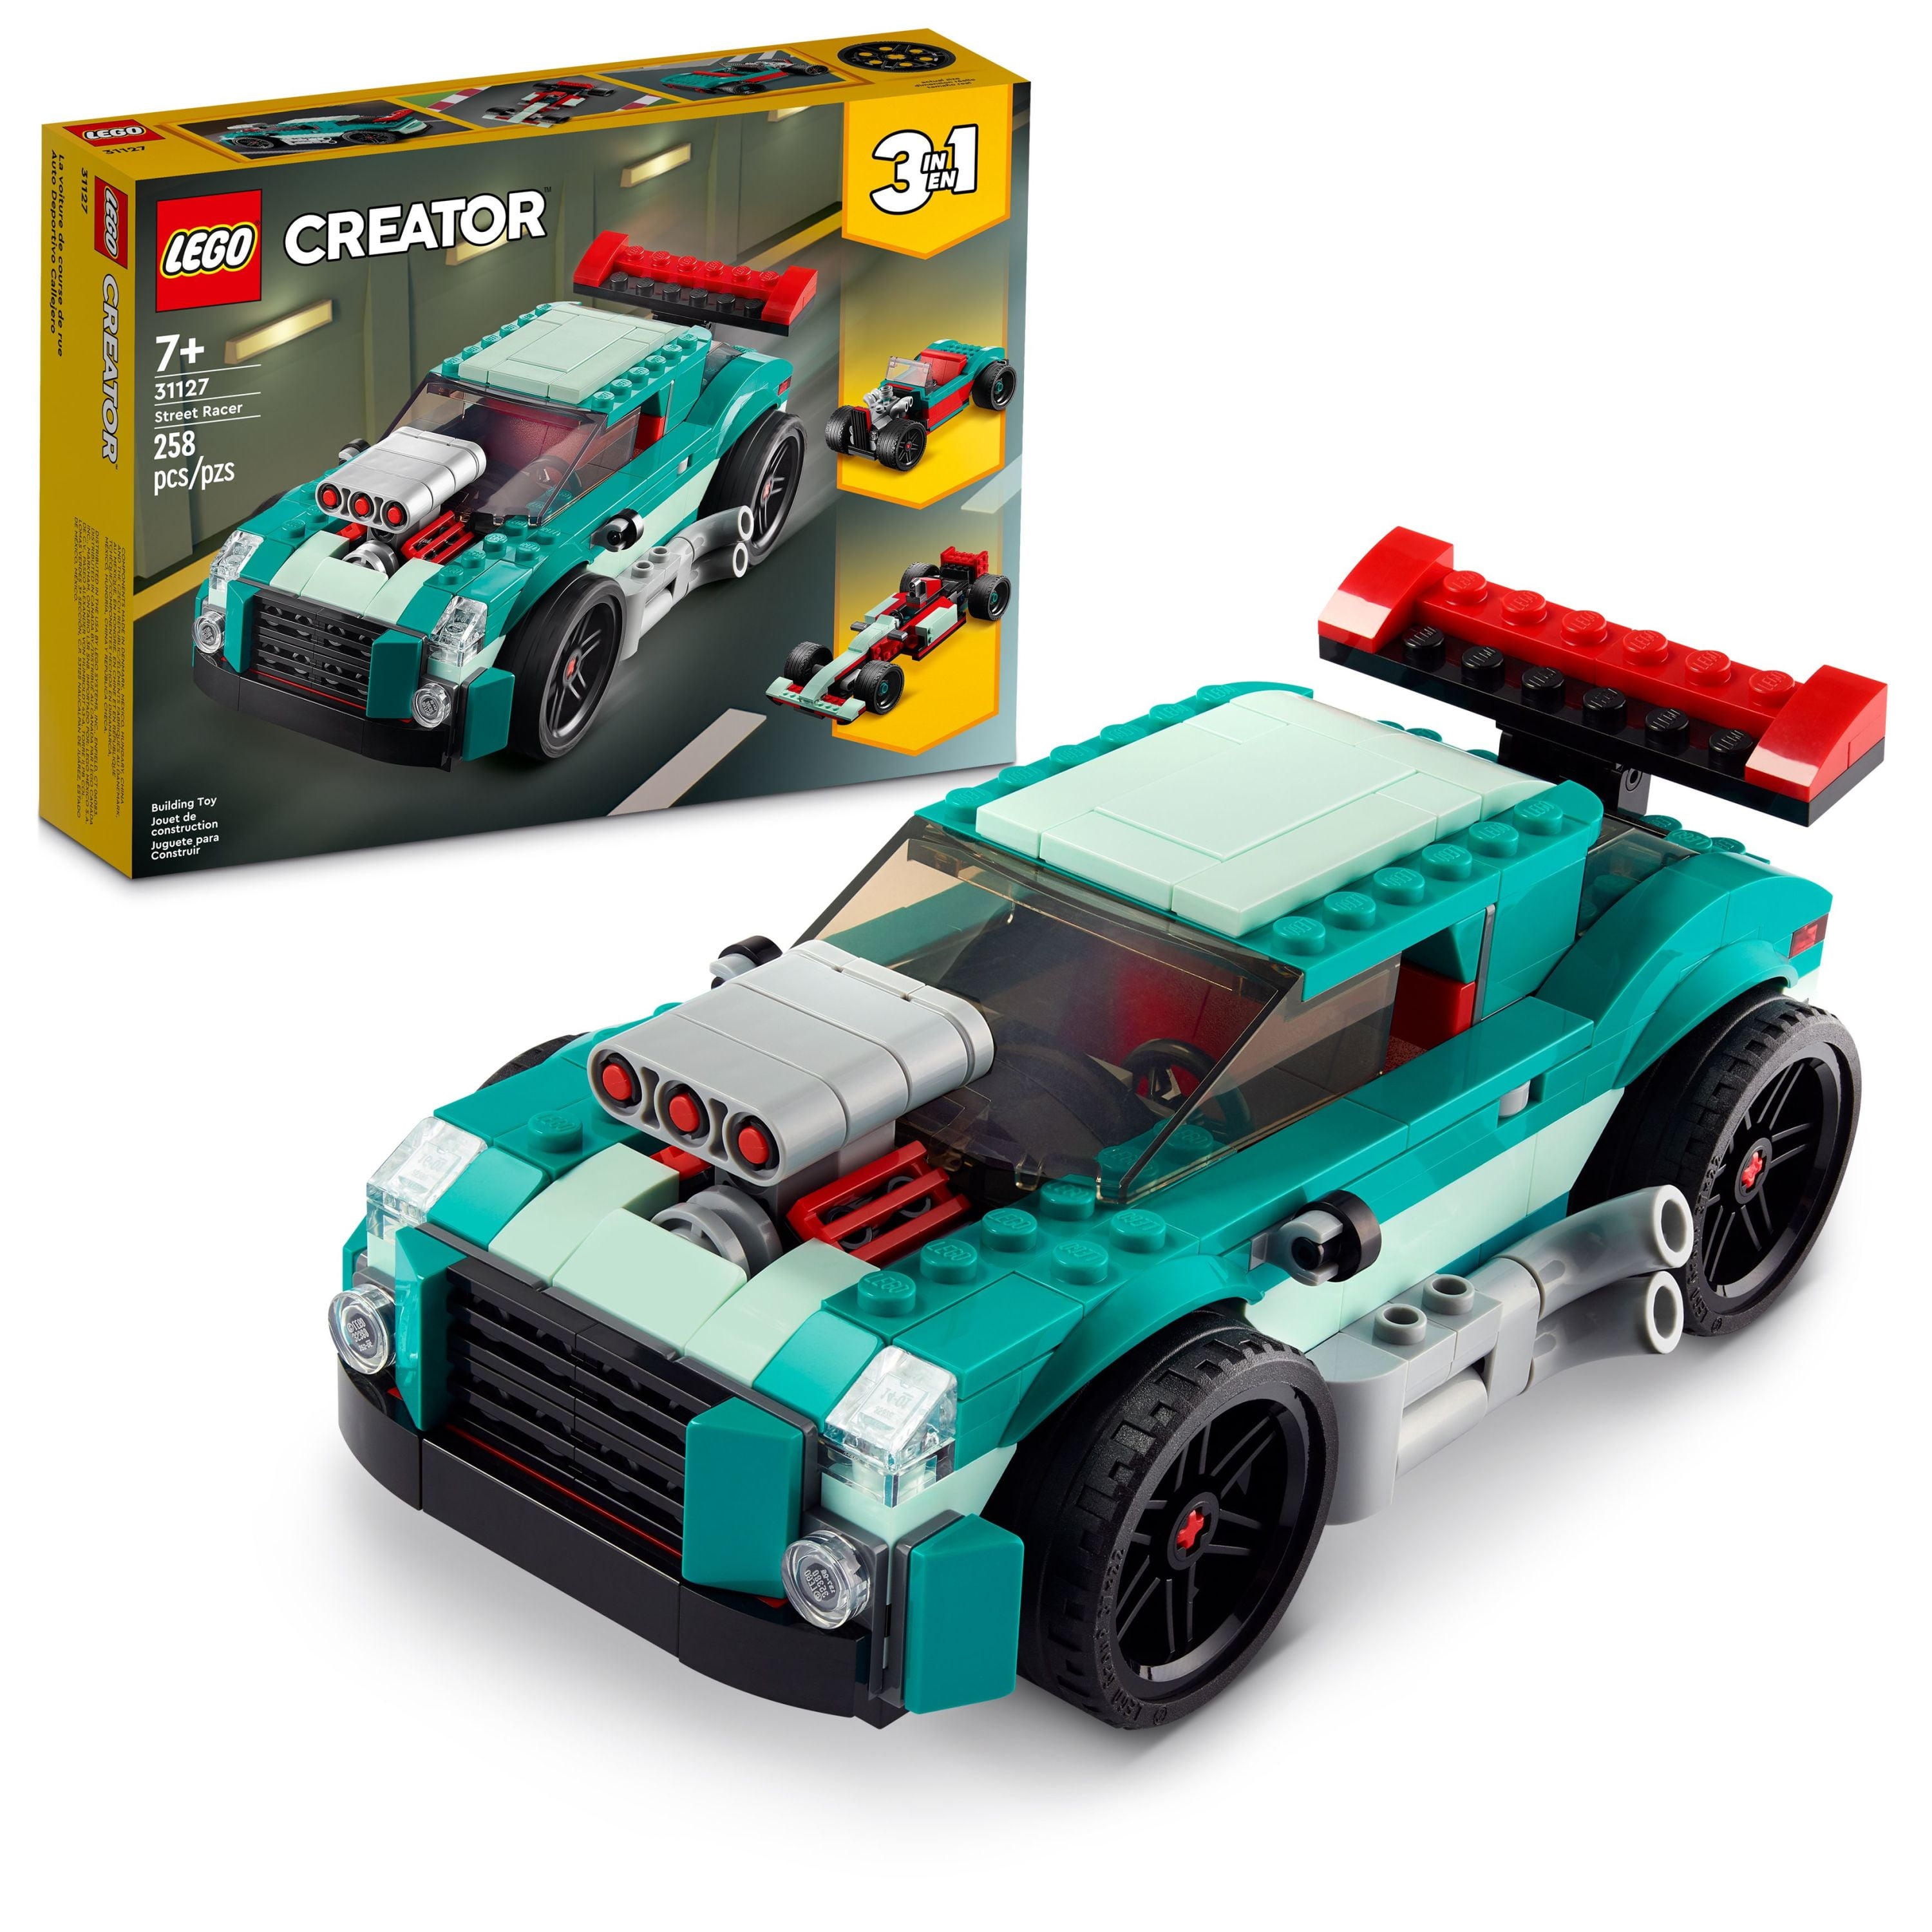 LEGO Creator 3in1 Racer Car 31127 Building Kit, Kids Can Build a Muscle Car, Hot Rod, and Race Car Toy, Great Model Car Toy Gift for Boys Girls Age 7+ Years